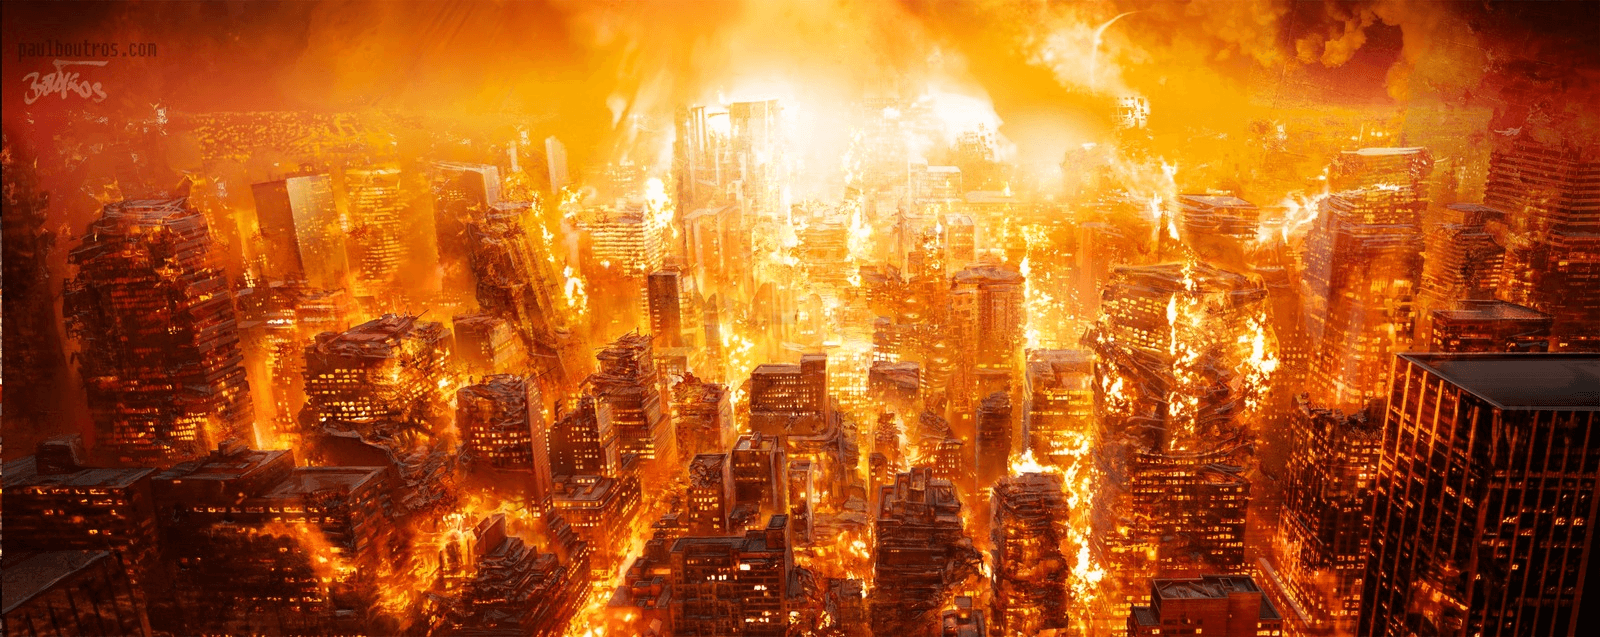 Quotes about Burning cities (24 quotes)